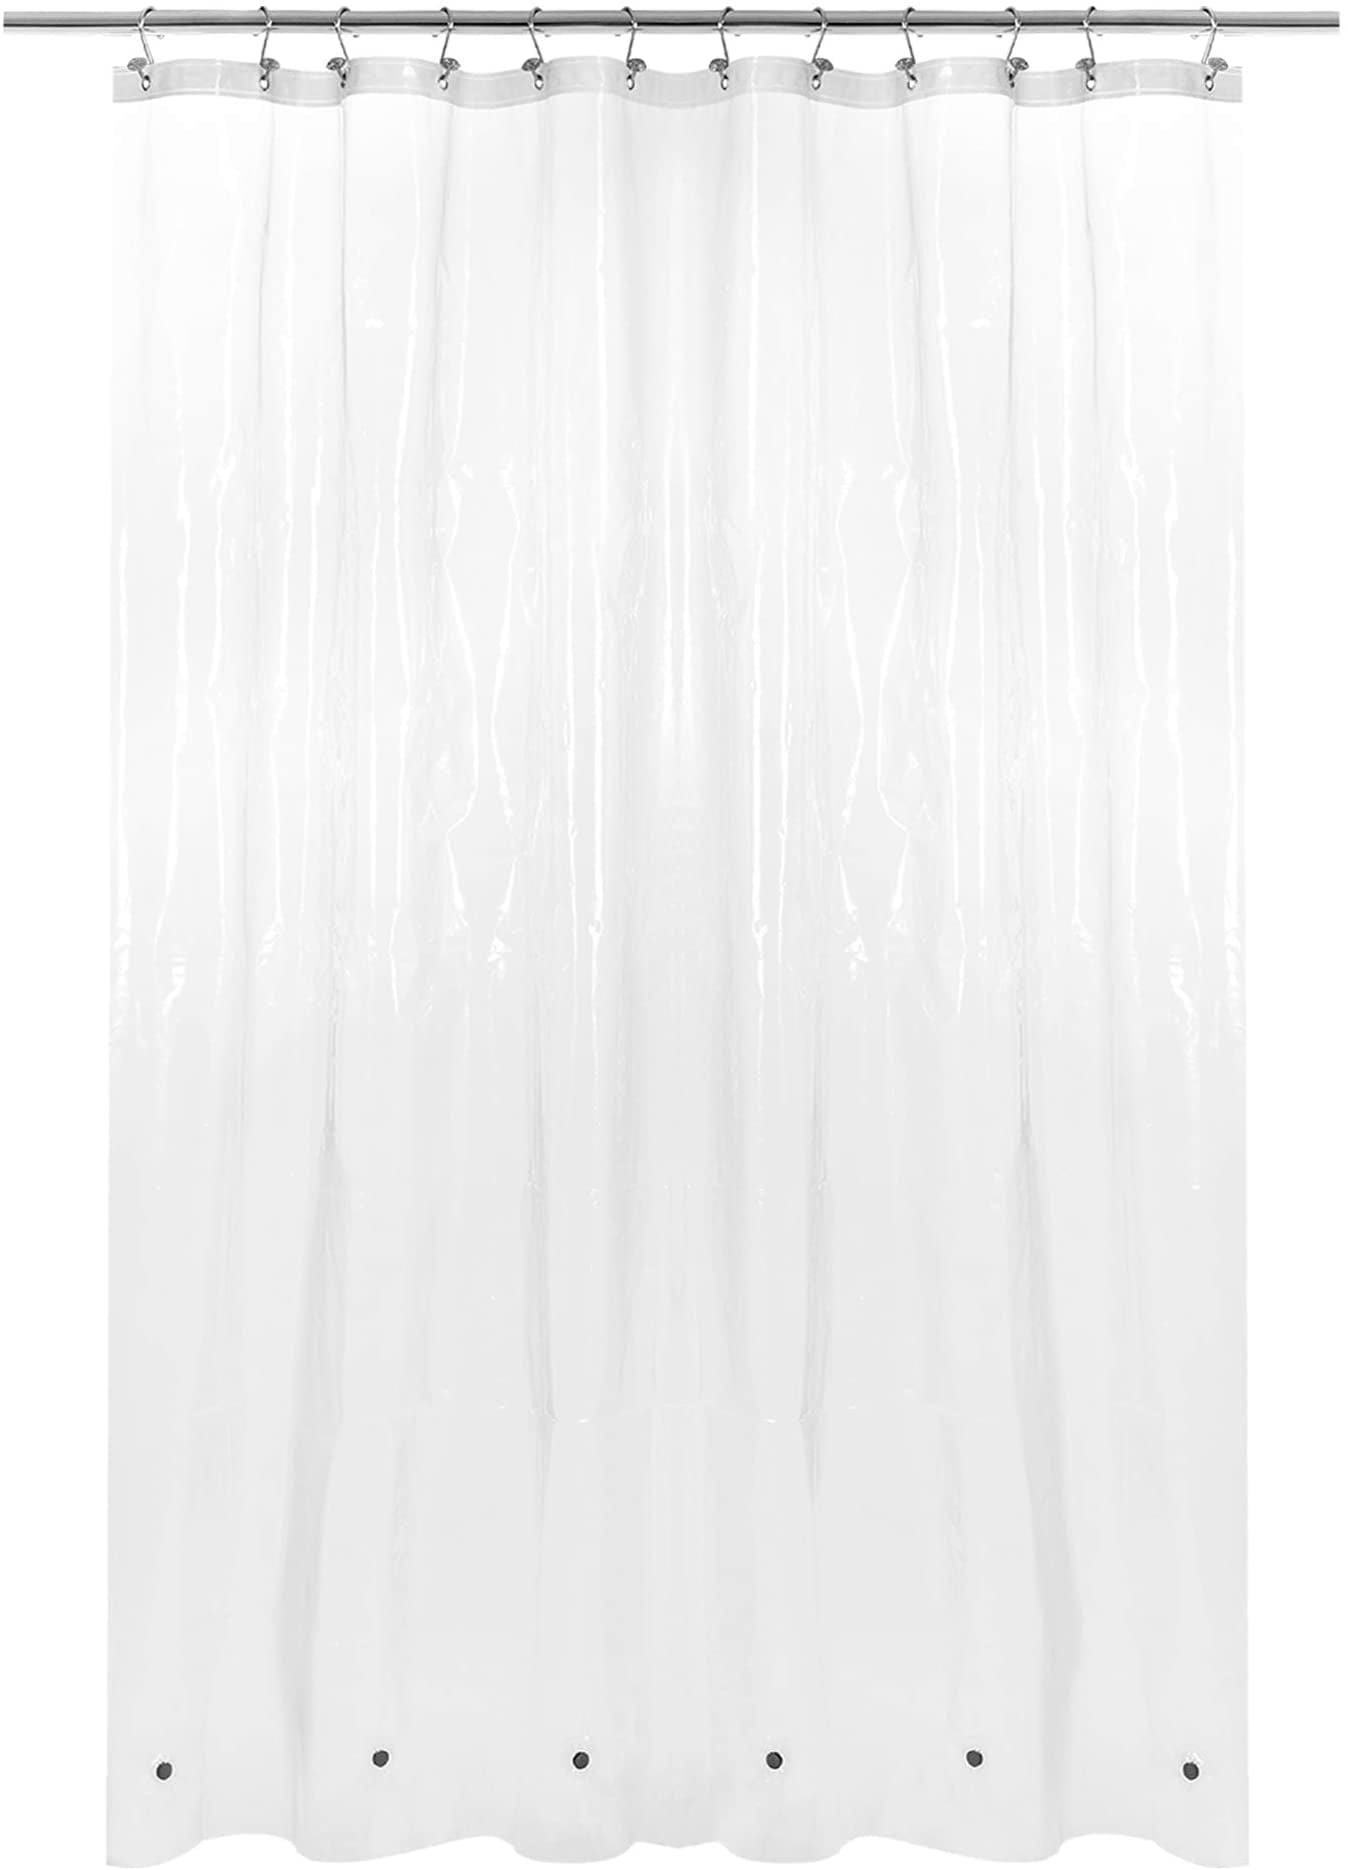 Details about   Mrs Awesome Short Shower Curtain Or Liner 66 Inch Length Clear Peva 8G Water-P 